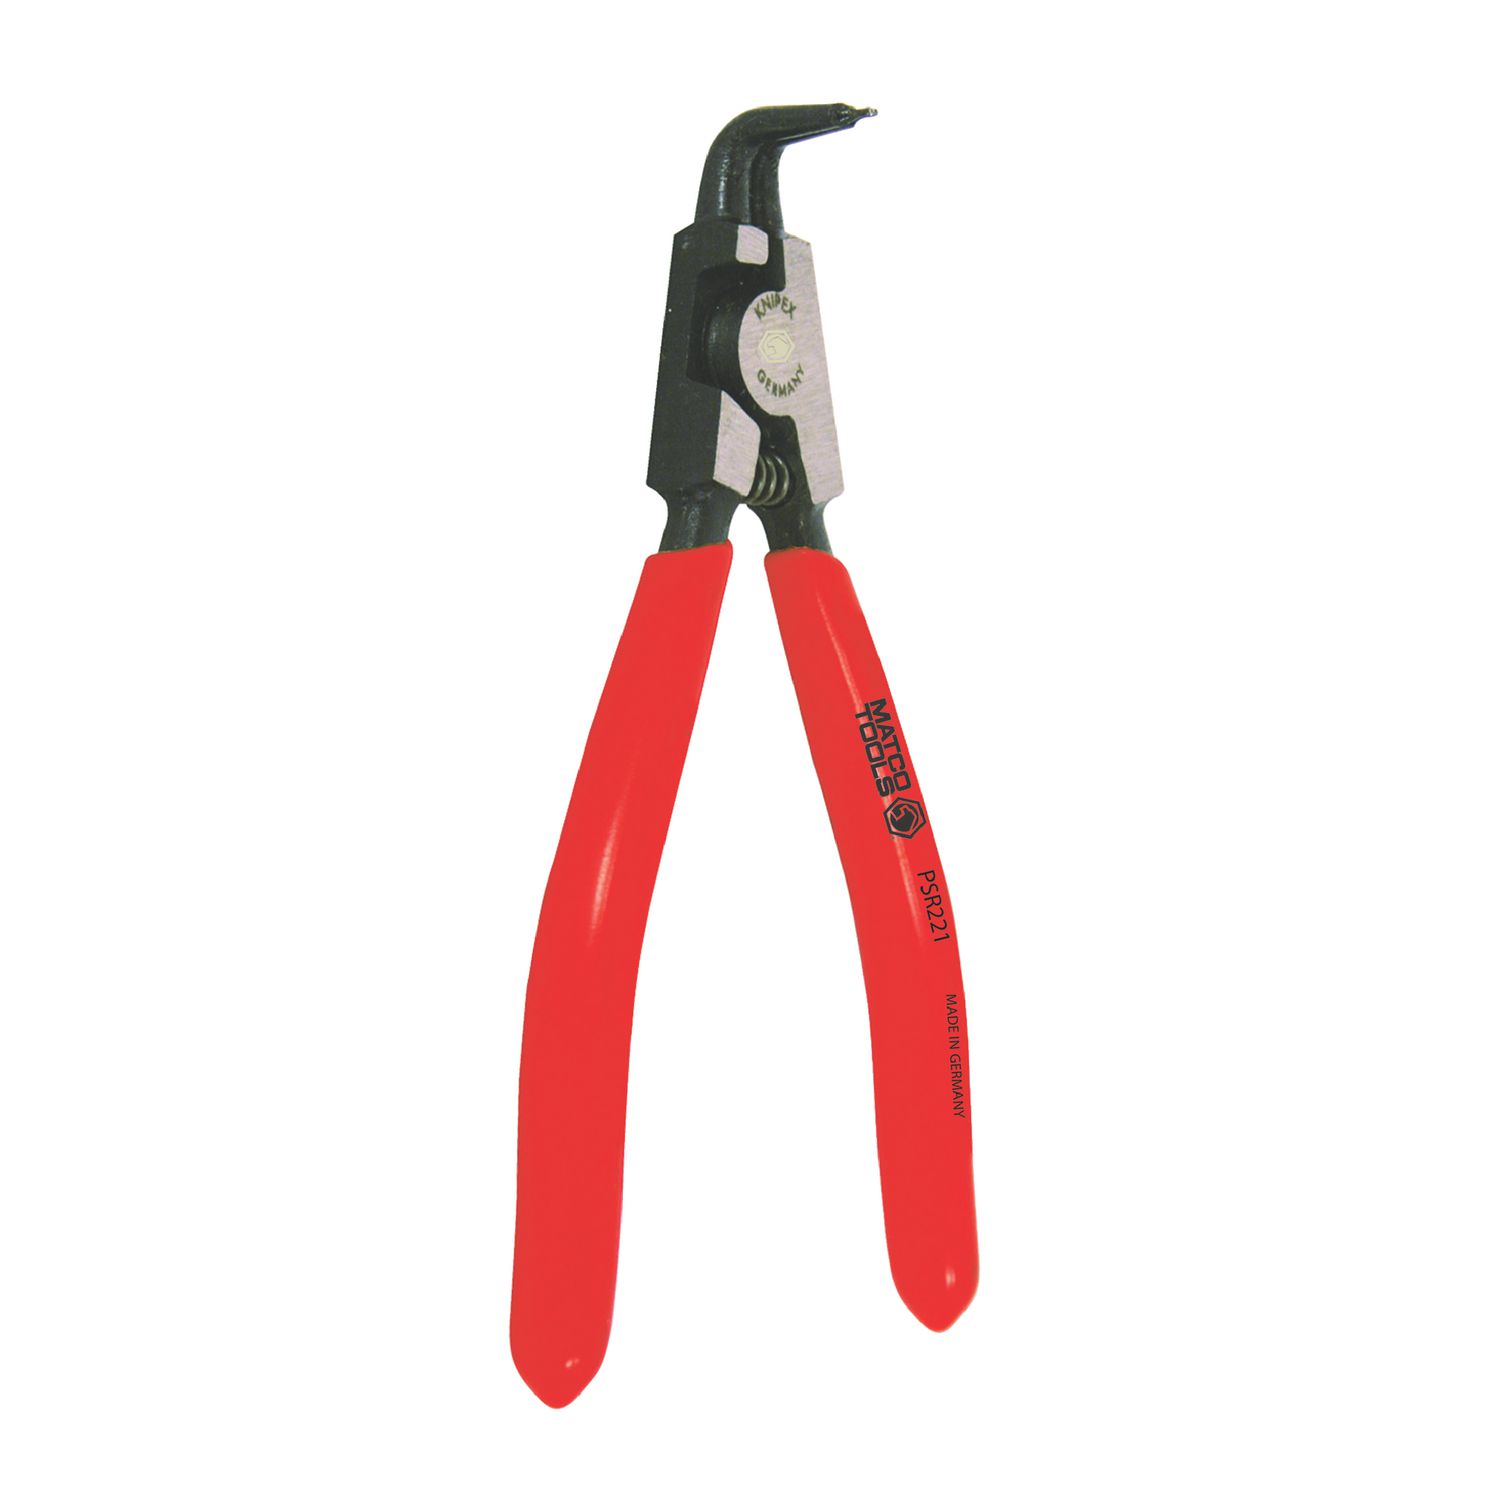 External Snap Ring Pliers - Knipex 414-4611A0 - Knipex Hand Tools